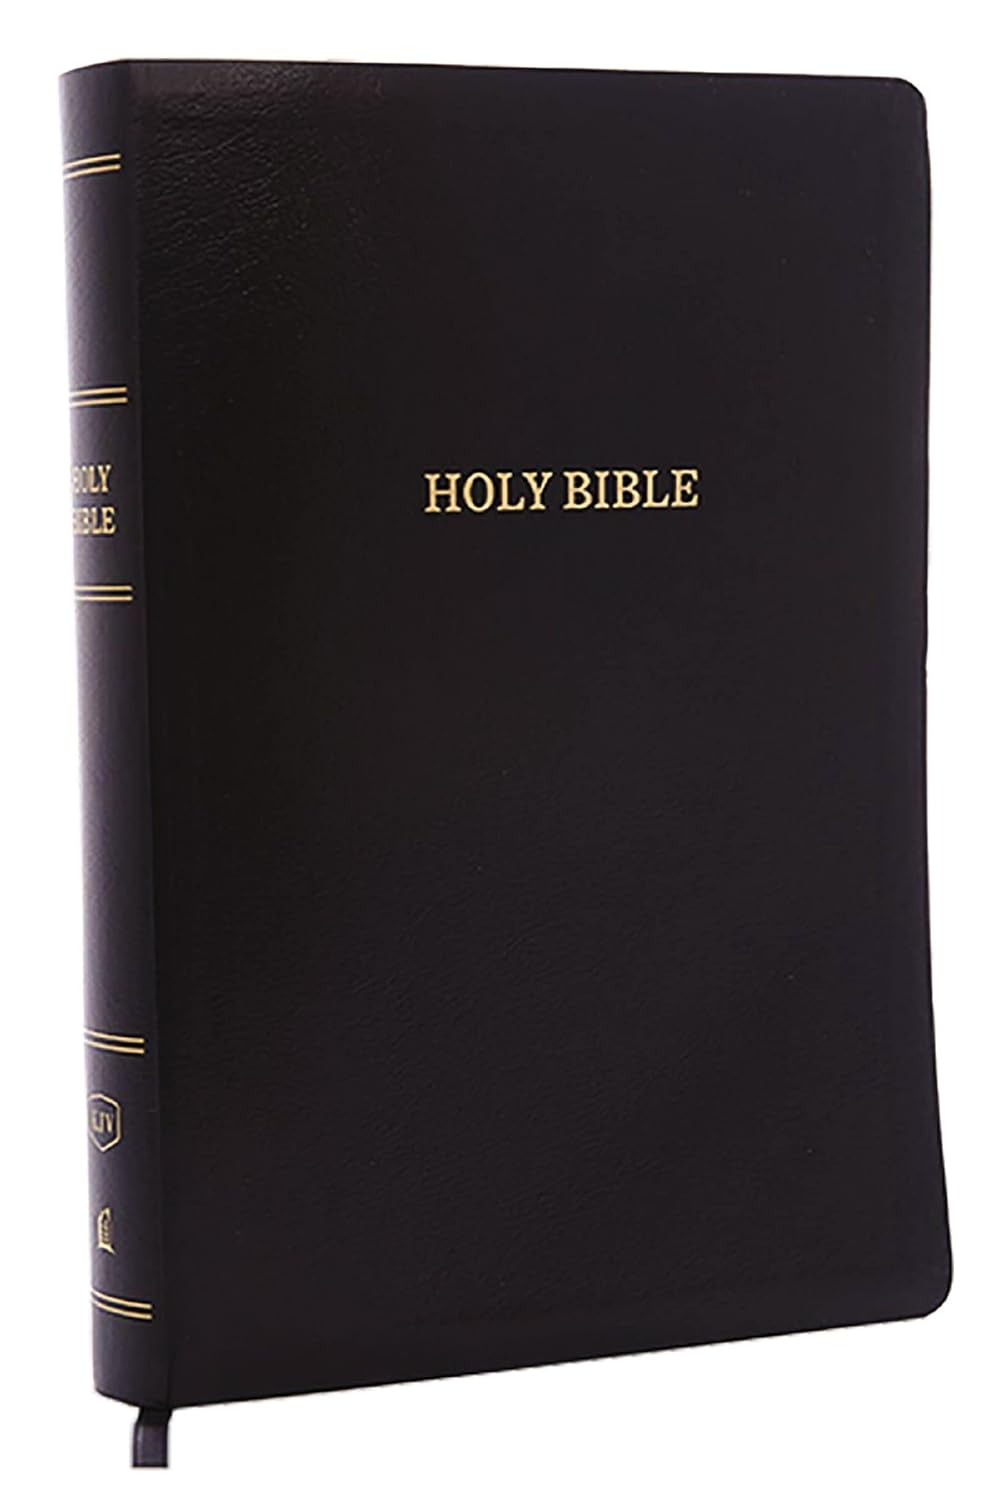 KJV Holy Bible - Super Giant Print w/ 43,000 Cross References - Leather Look Black